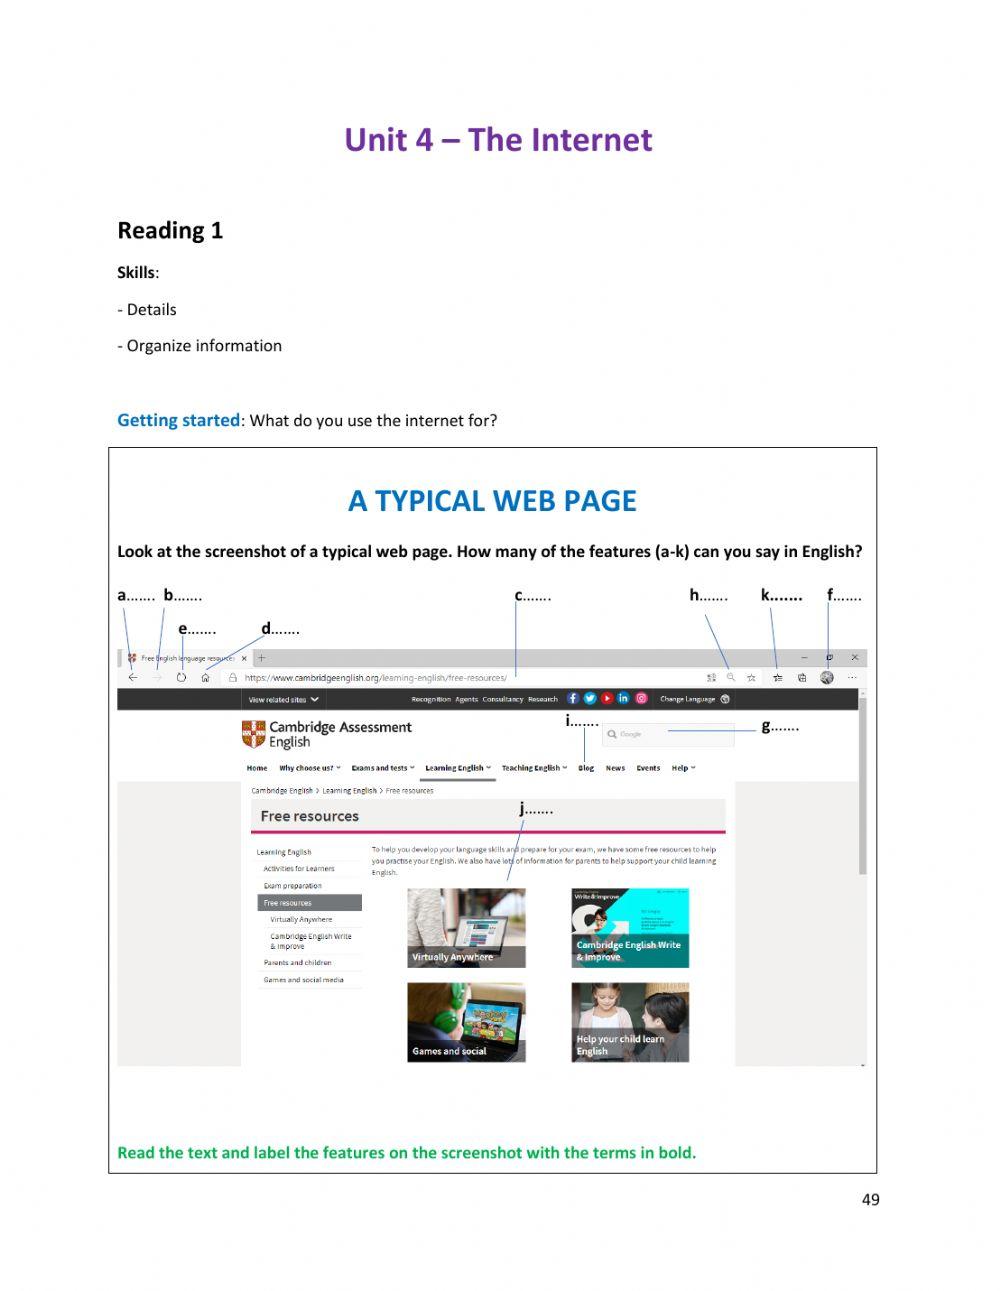 A typical web page